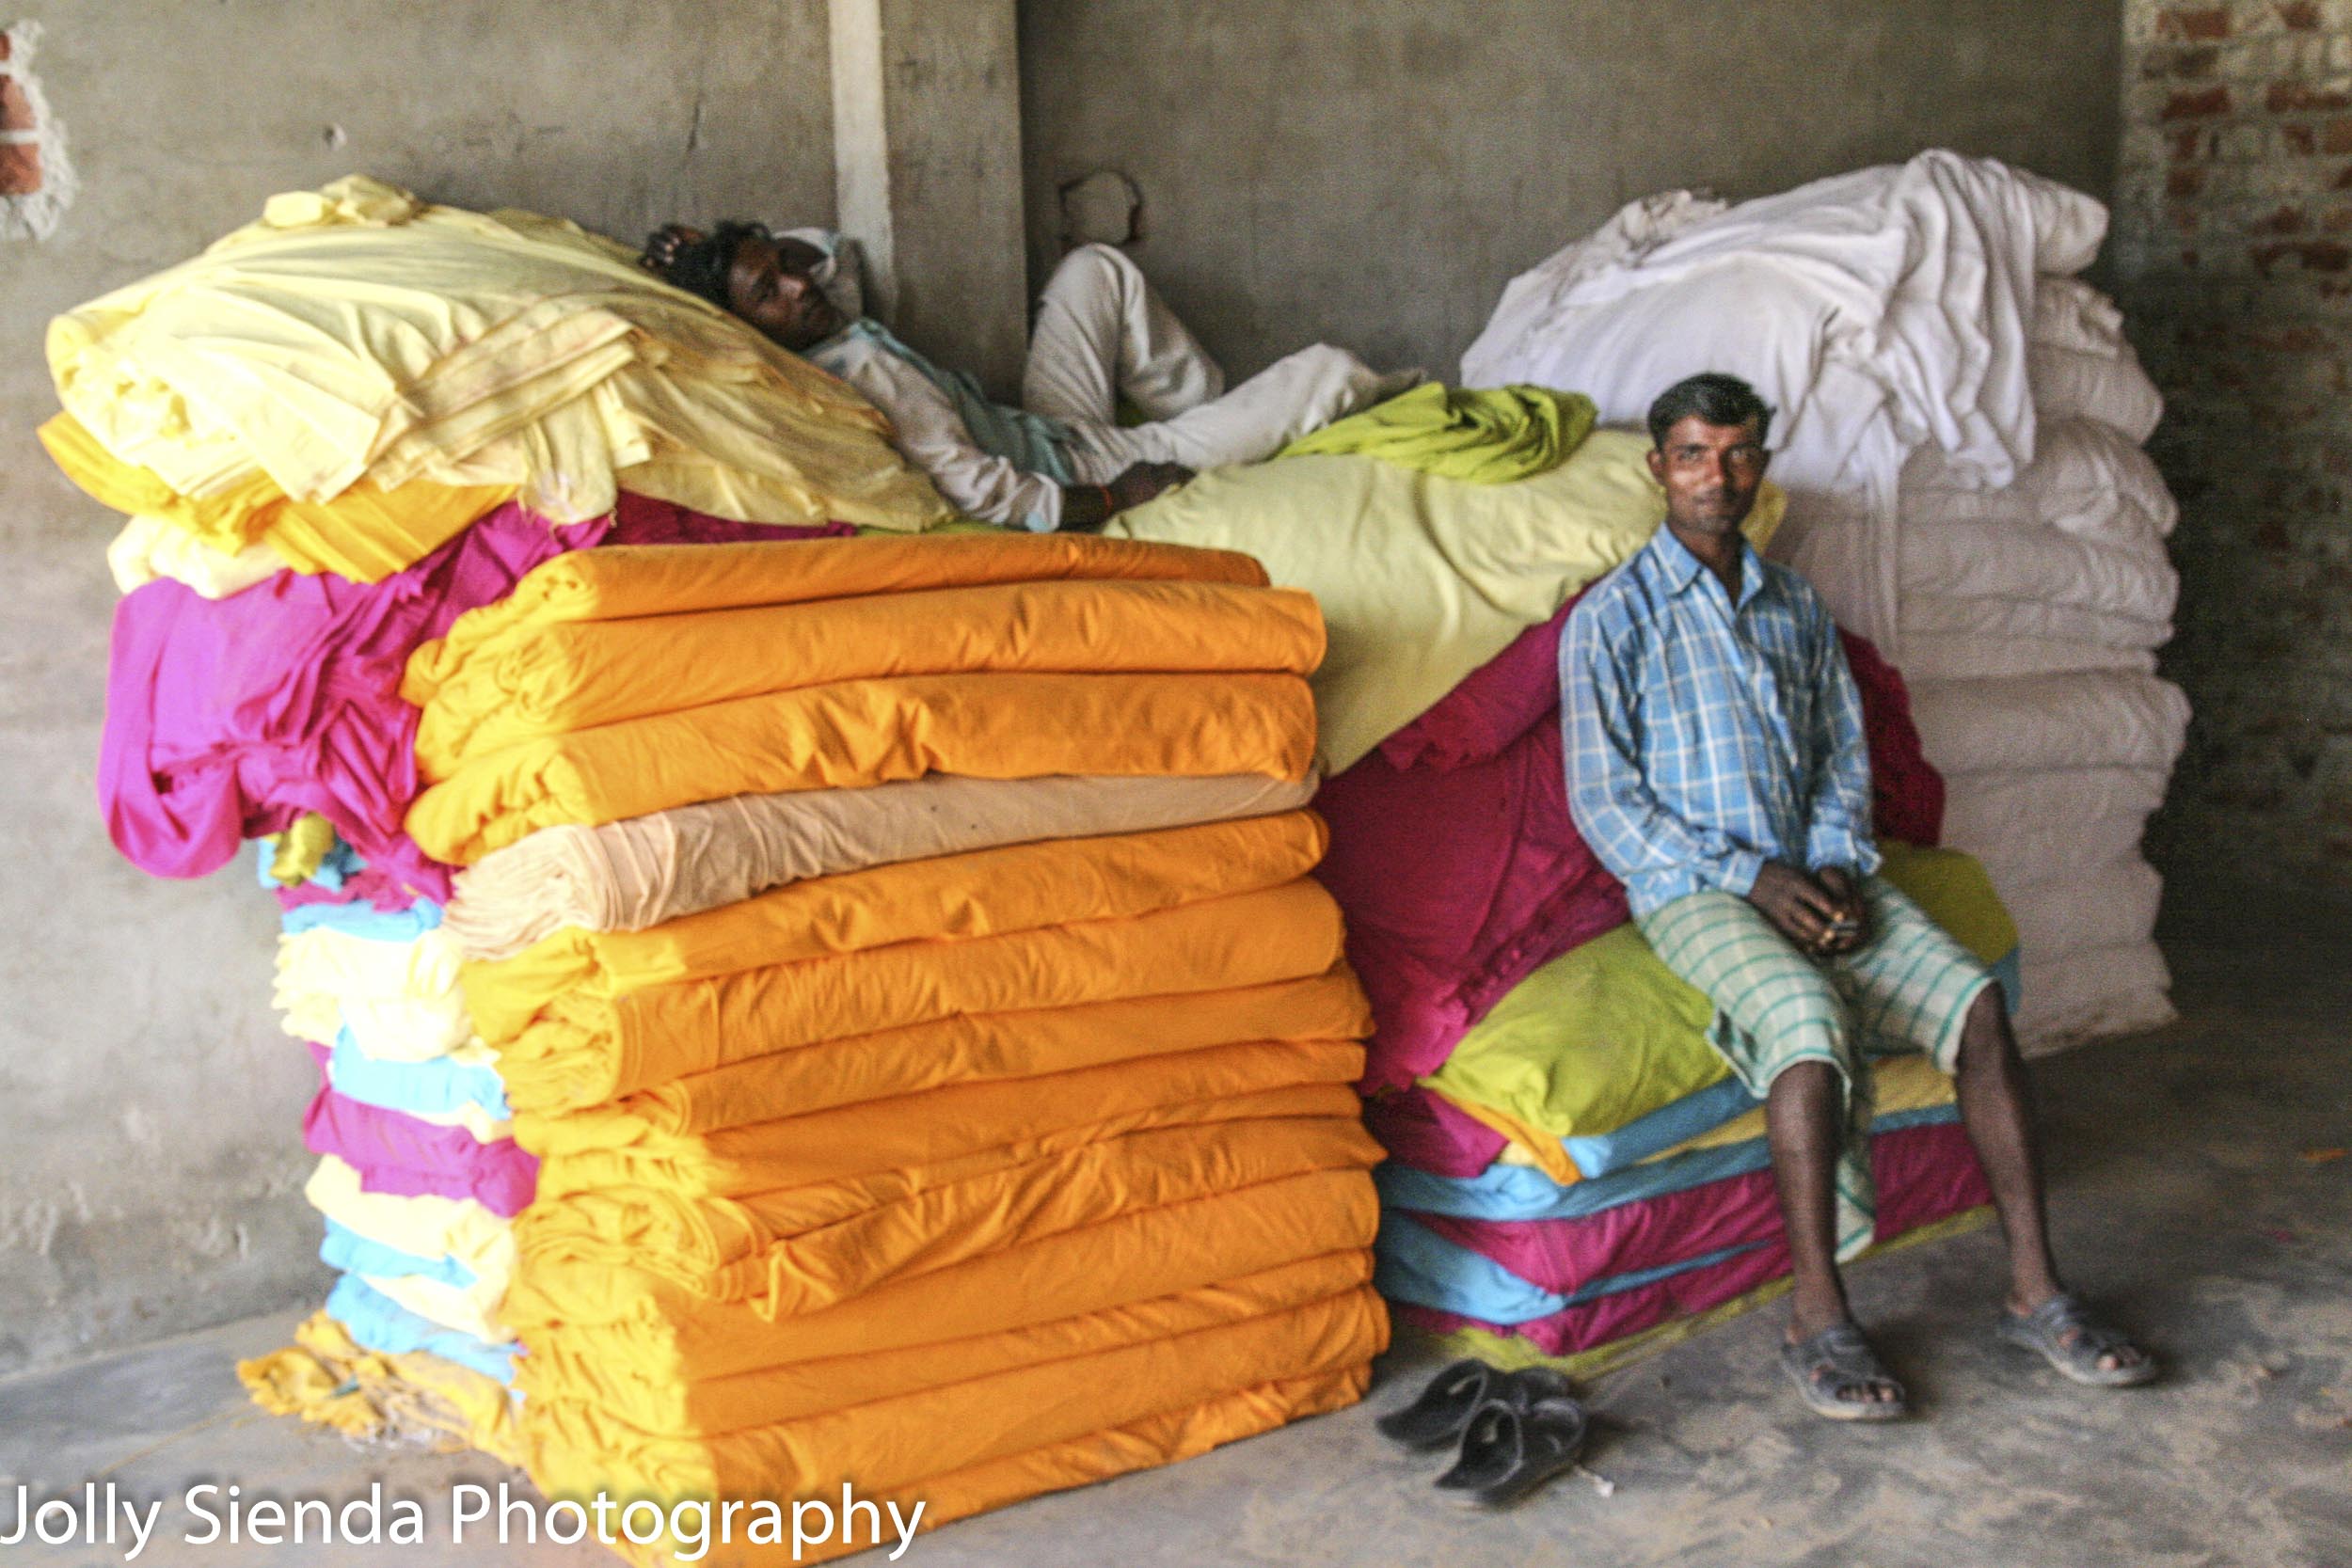 Print block factory workers rest on material